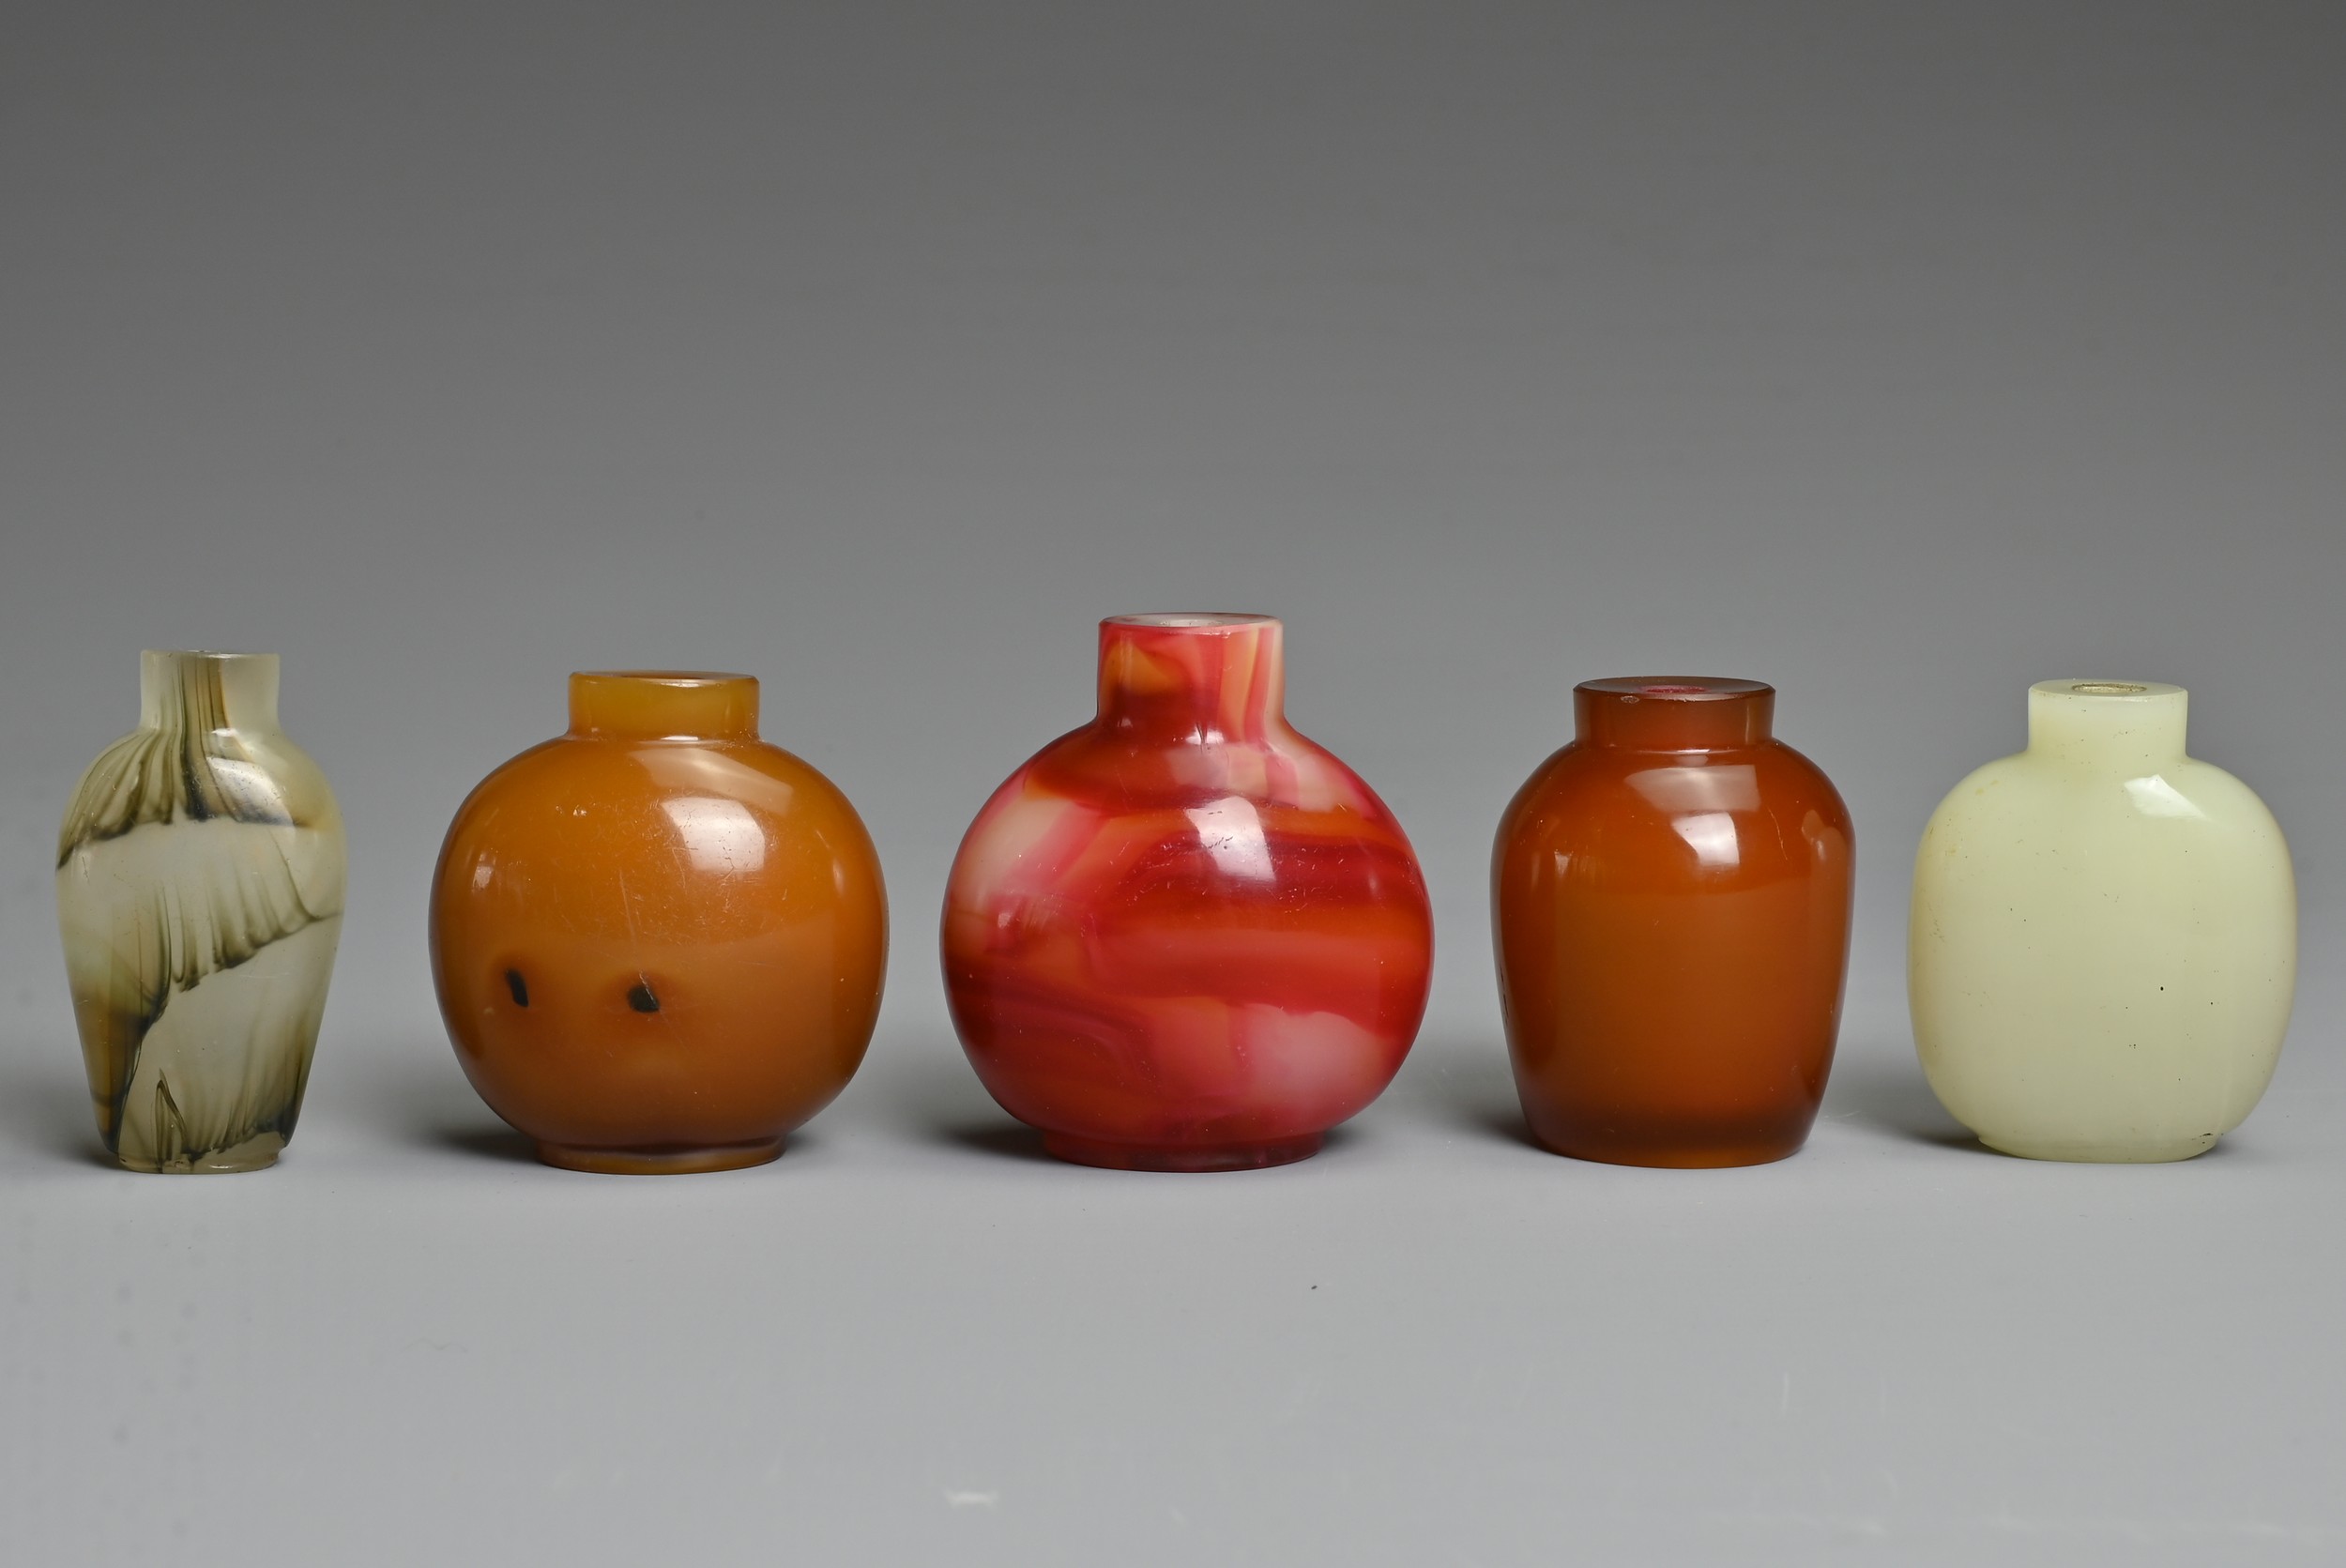 FIVE CHINESE GLASS SNUFF BOTTLES. Each of varied coloured glass of different forms. Approx. 5.